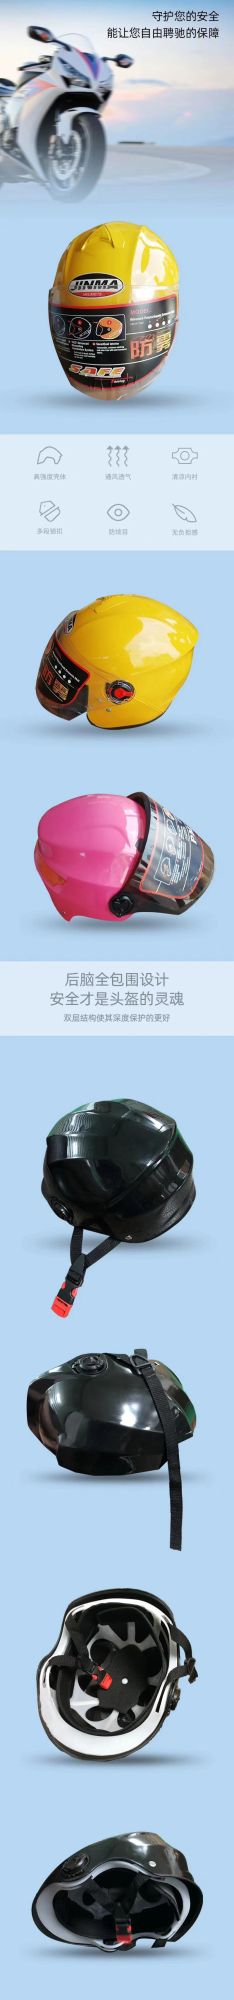 Plastic Motorcycle Helmet Injection Mould